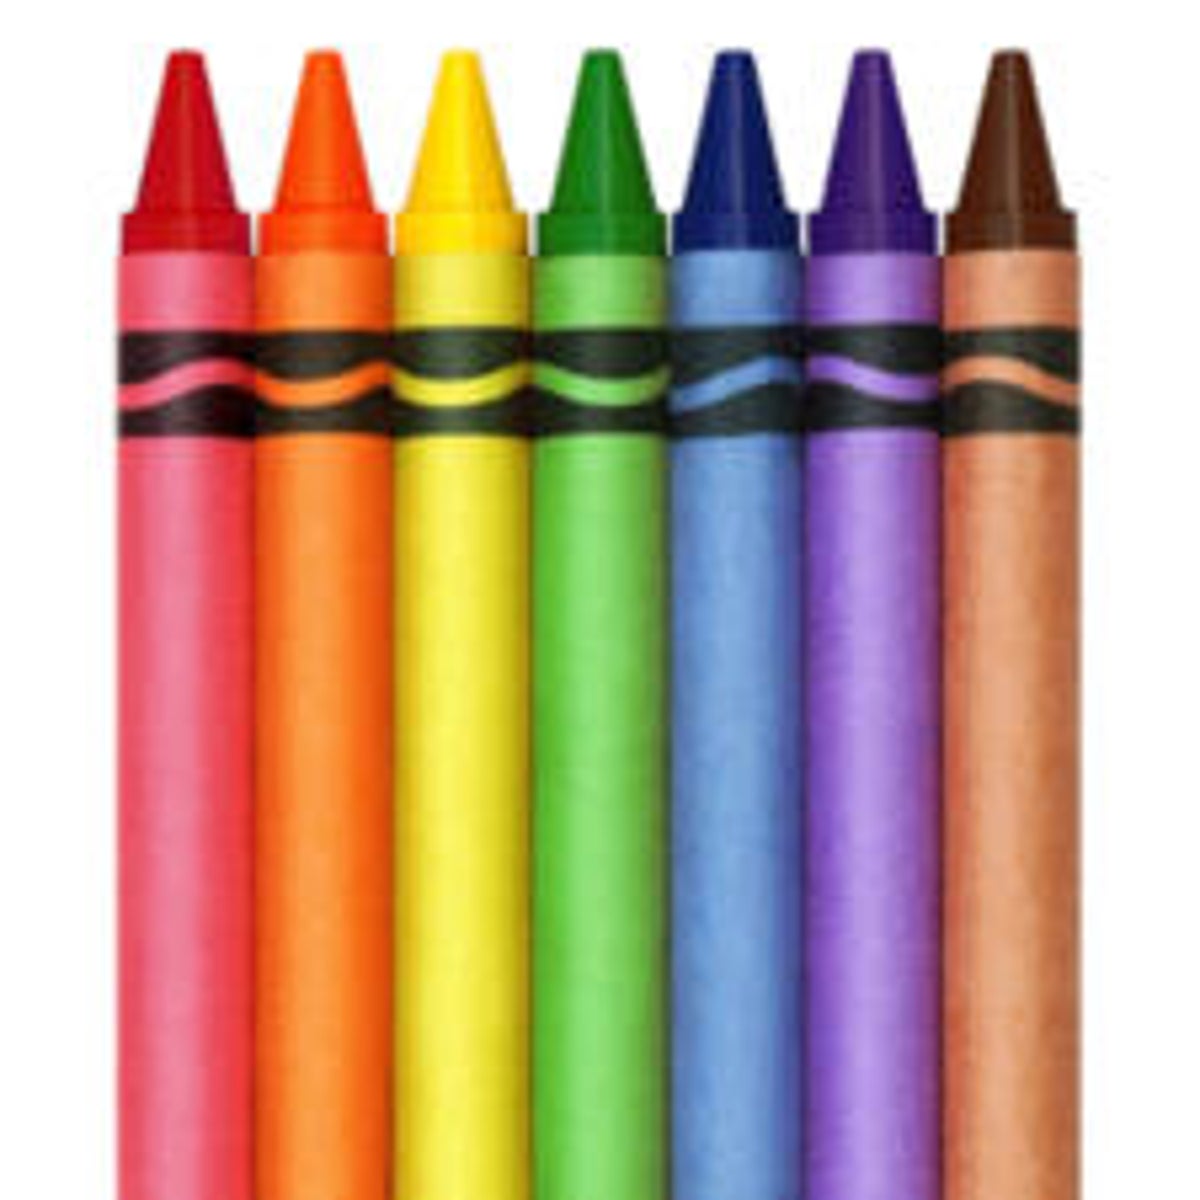 Crayons Clip Art Set - 20 Colors - Personal & Commercial Use